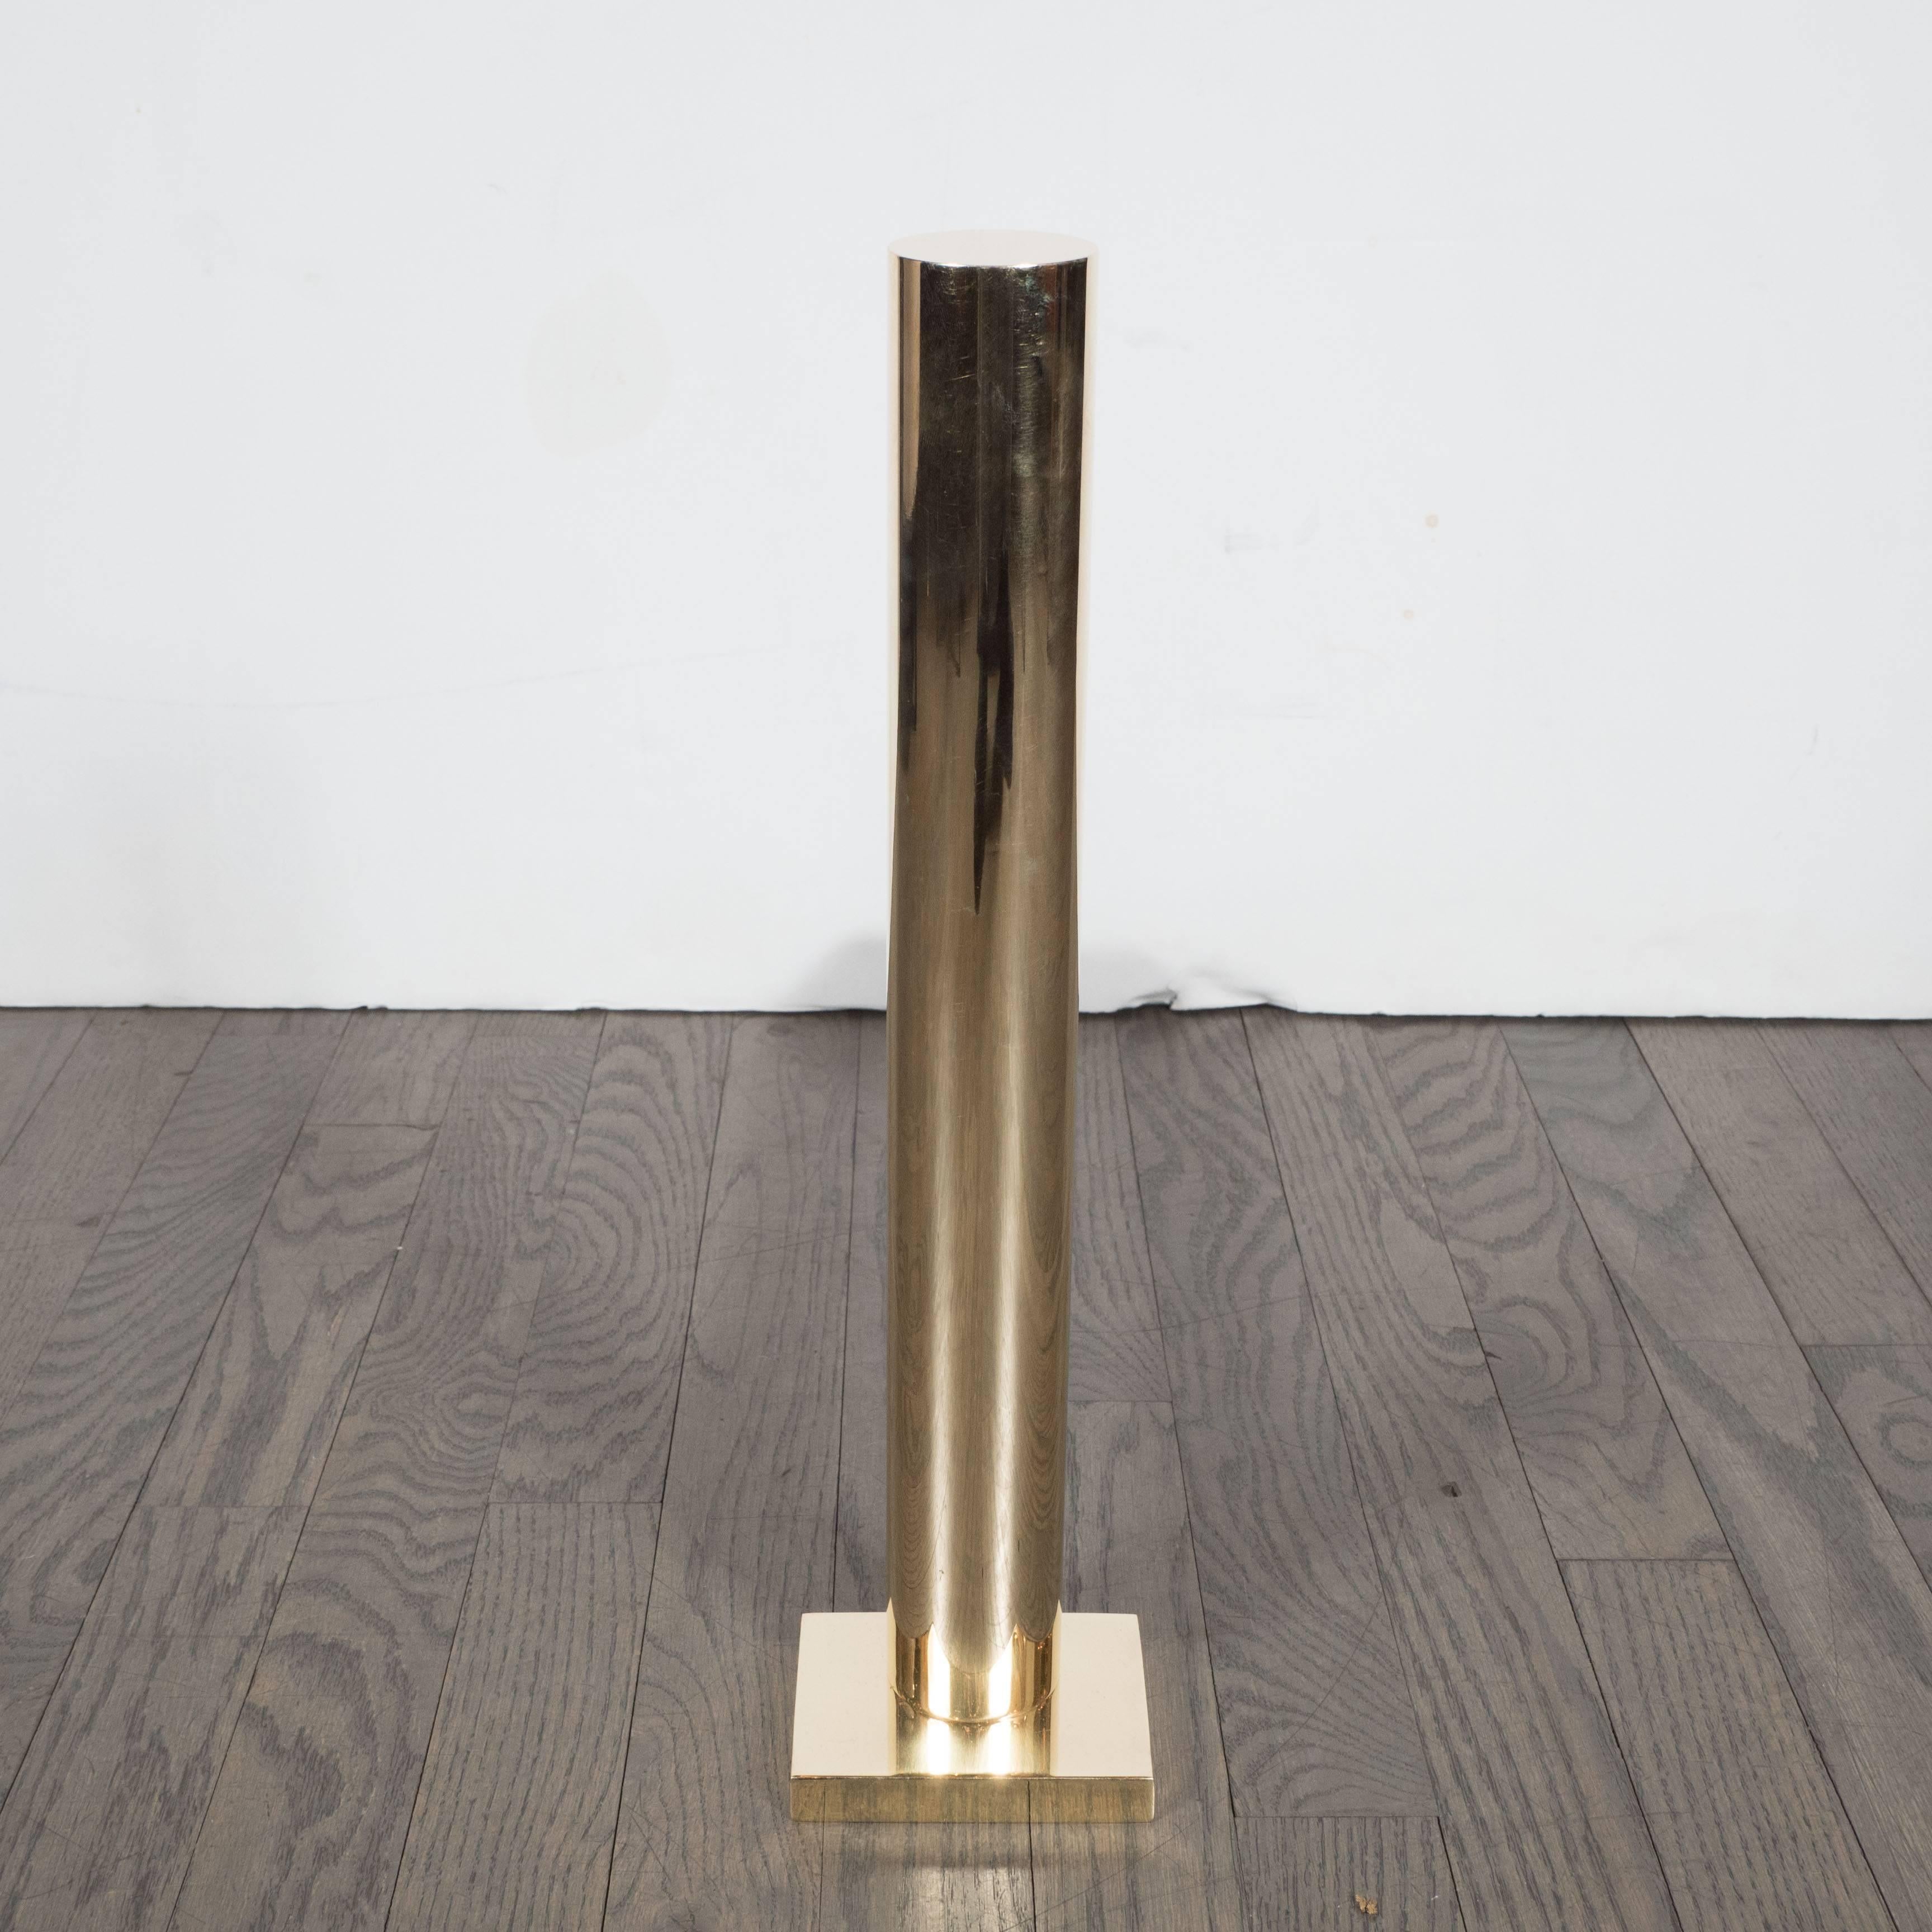 These stunning custom andirons feature a polished brass cylindrical form, rectangular base and black enamel supports. Please ask about the very many available finish options. These can be beautifully accompanied by our custom range of fire tools and